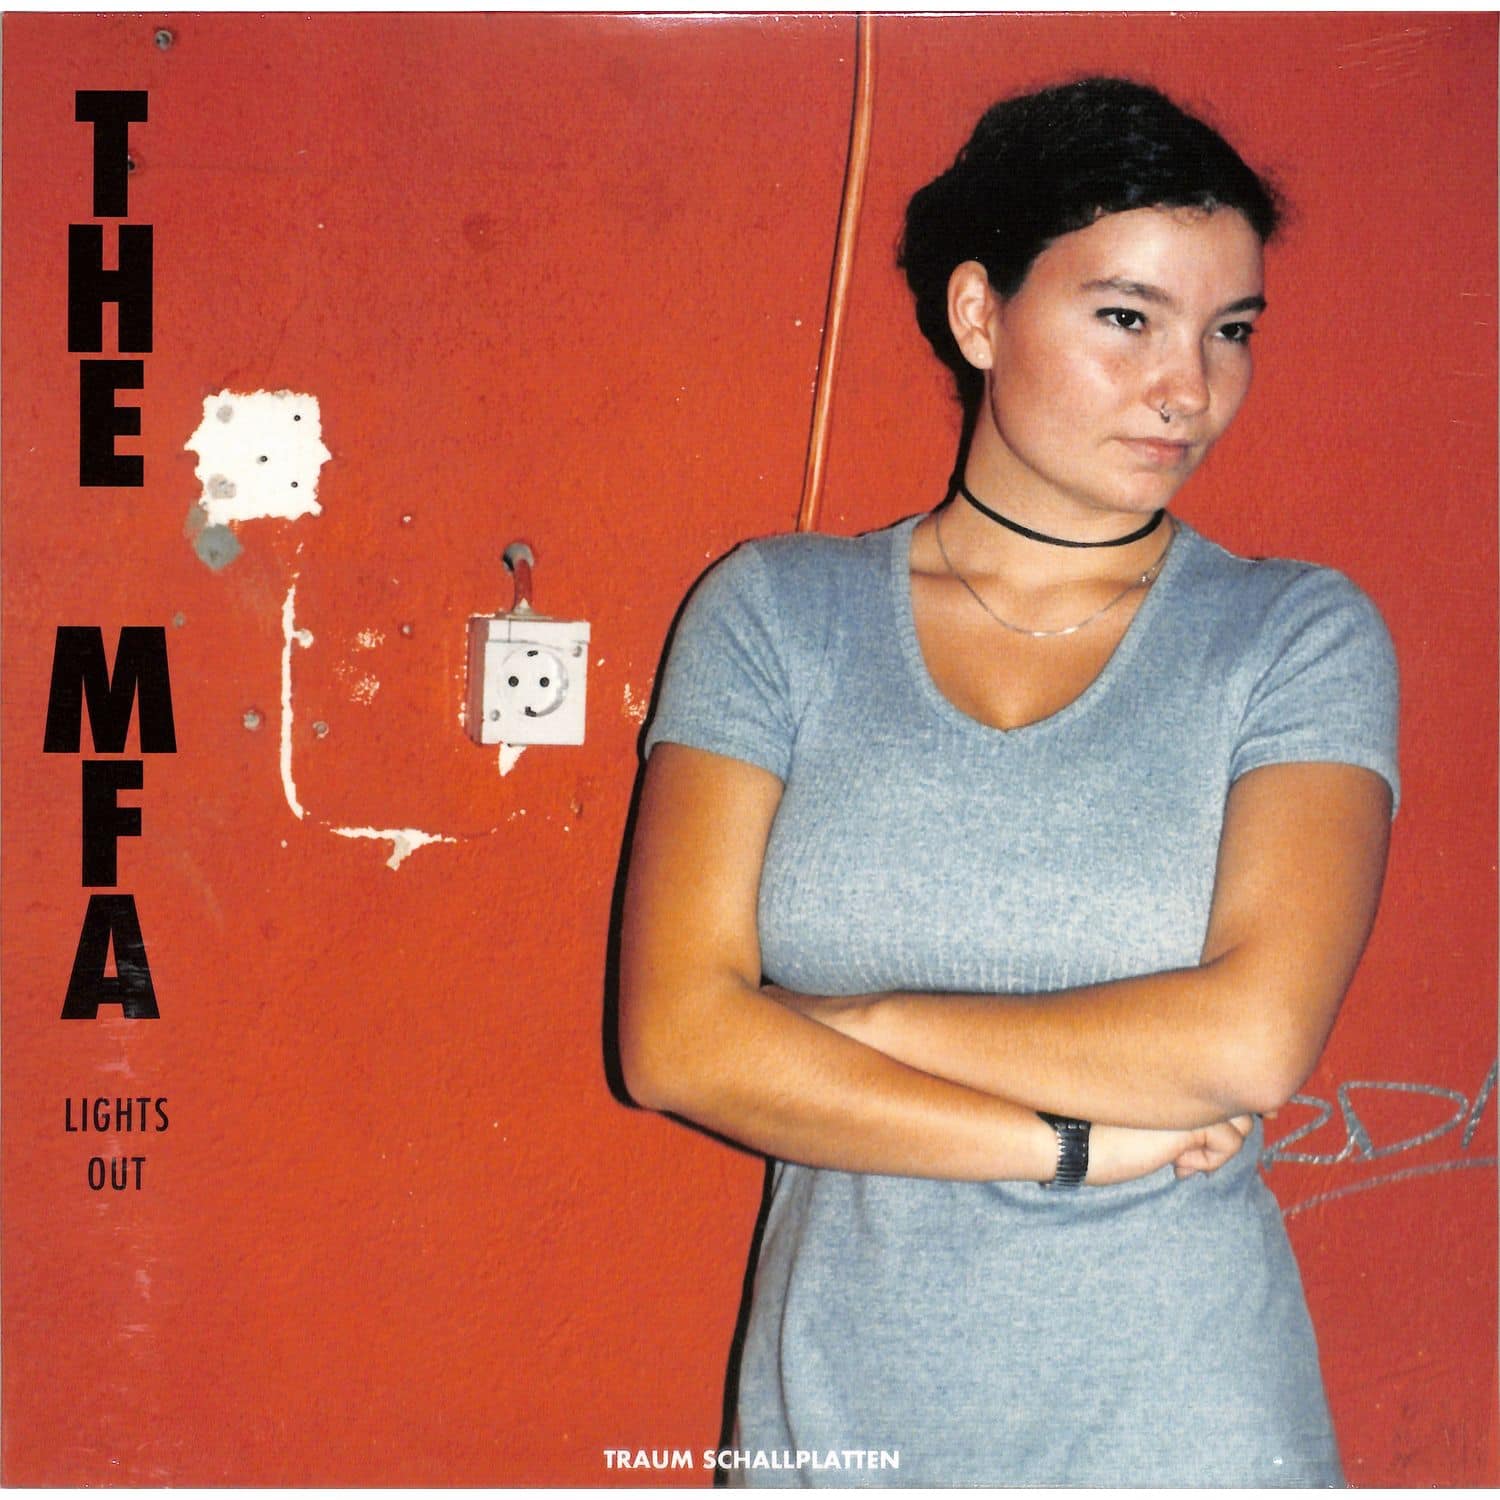 The MFA - LIGHTS OUT 